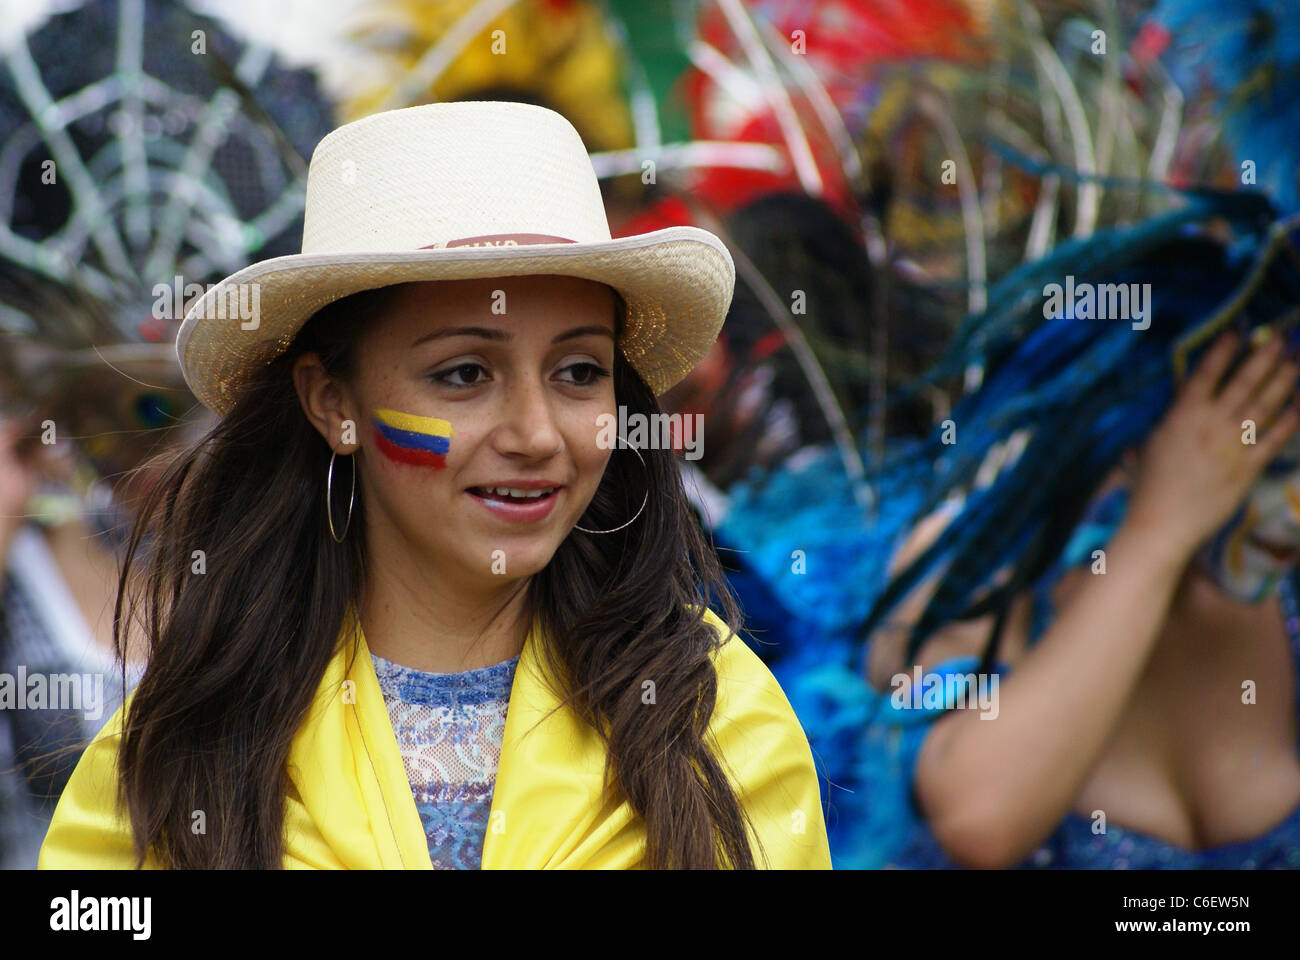 Performers at Carnaval del Pueblo, Europe's largest celebration of Latin American culture. Stock Photo